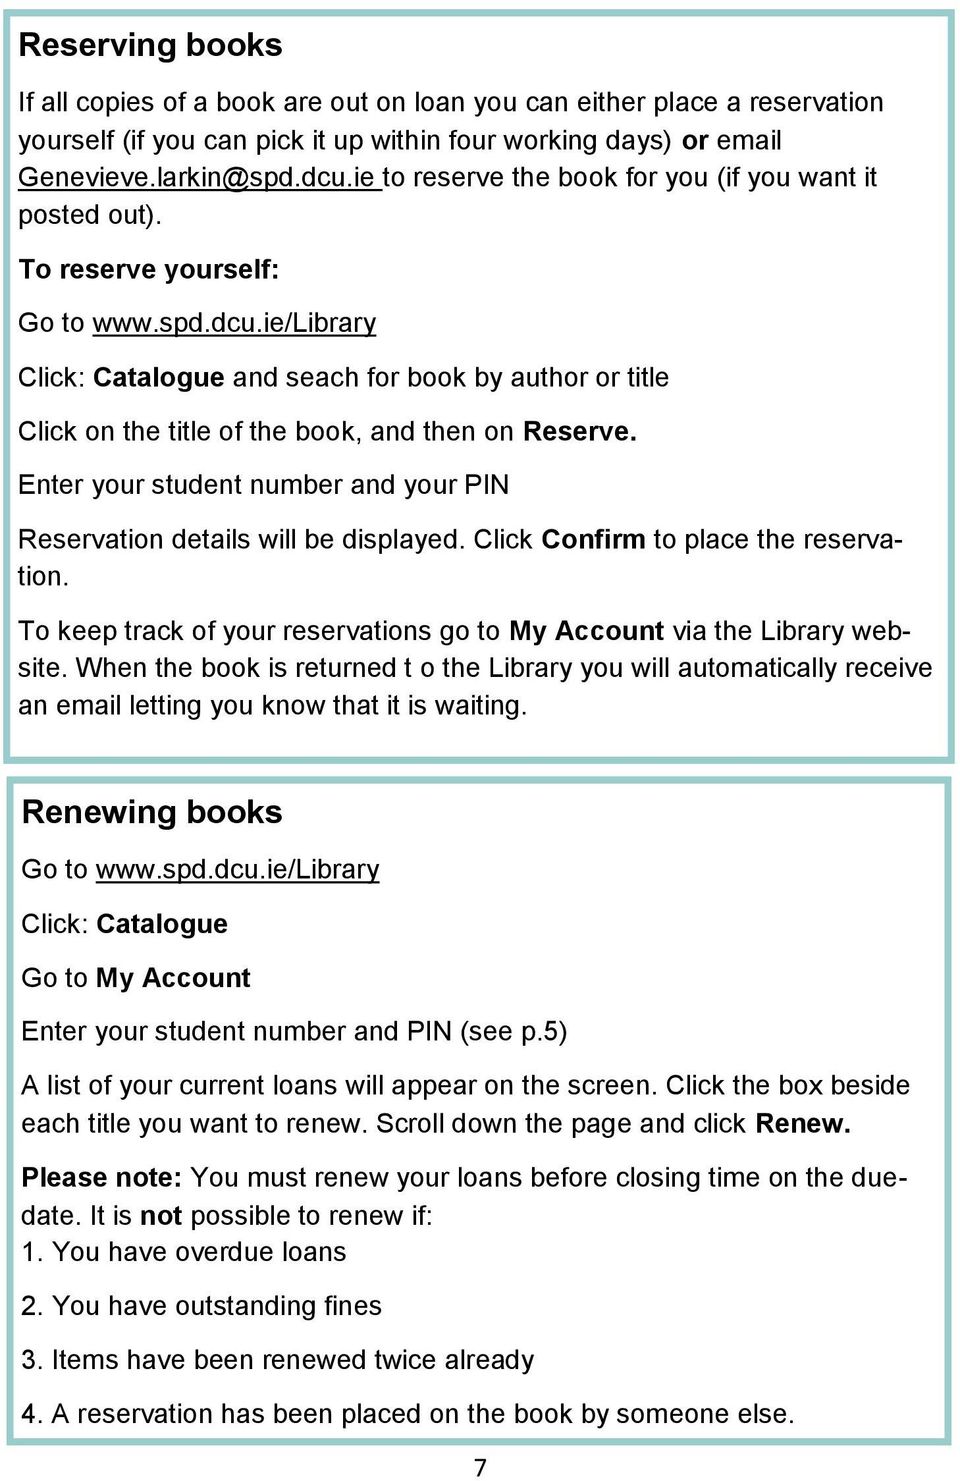 ie/library Click: Catalogue and seach for book by author or title Click on the title of the book, and then on Reserve. Enter your student number and your PIN Reservation details will be displayed.